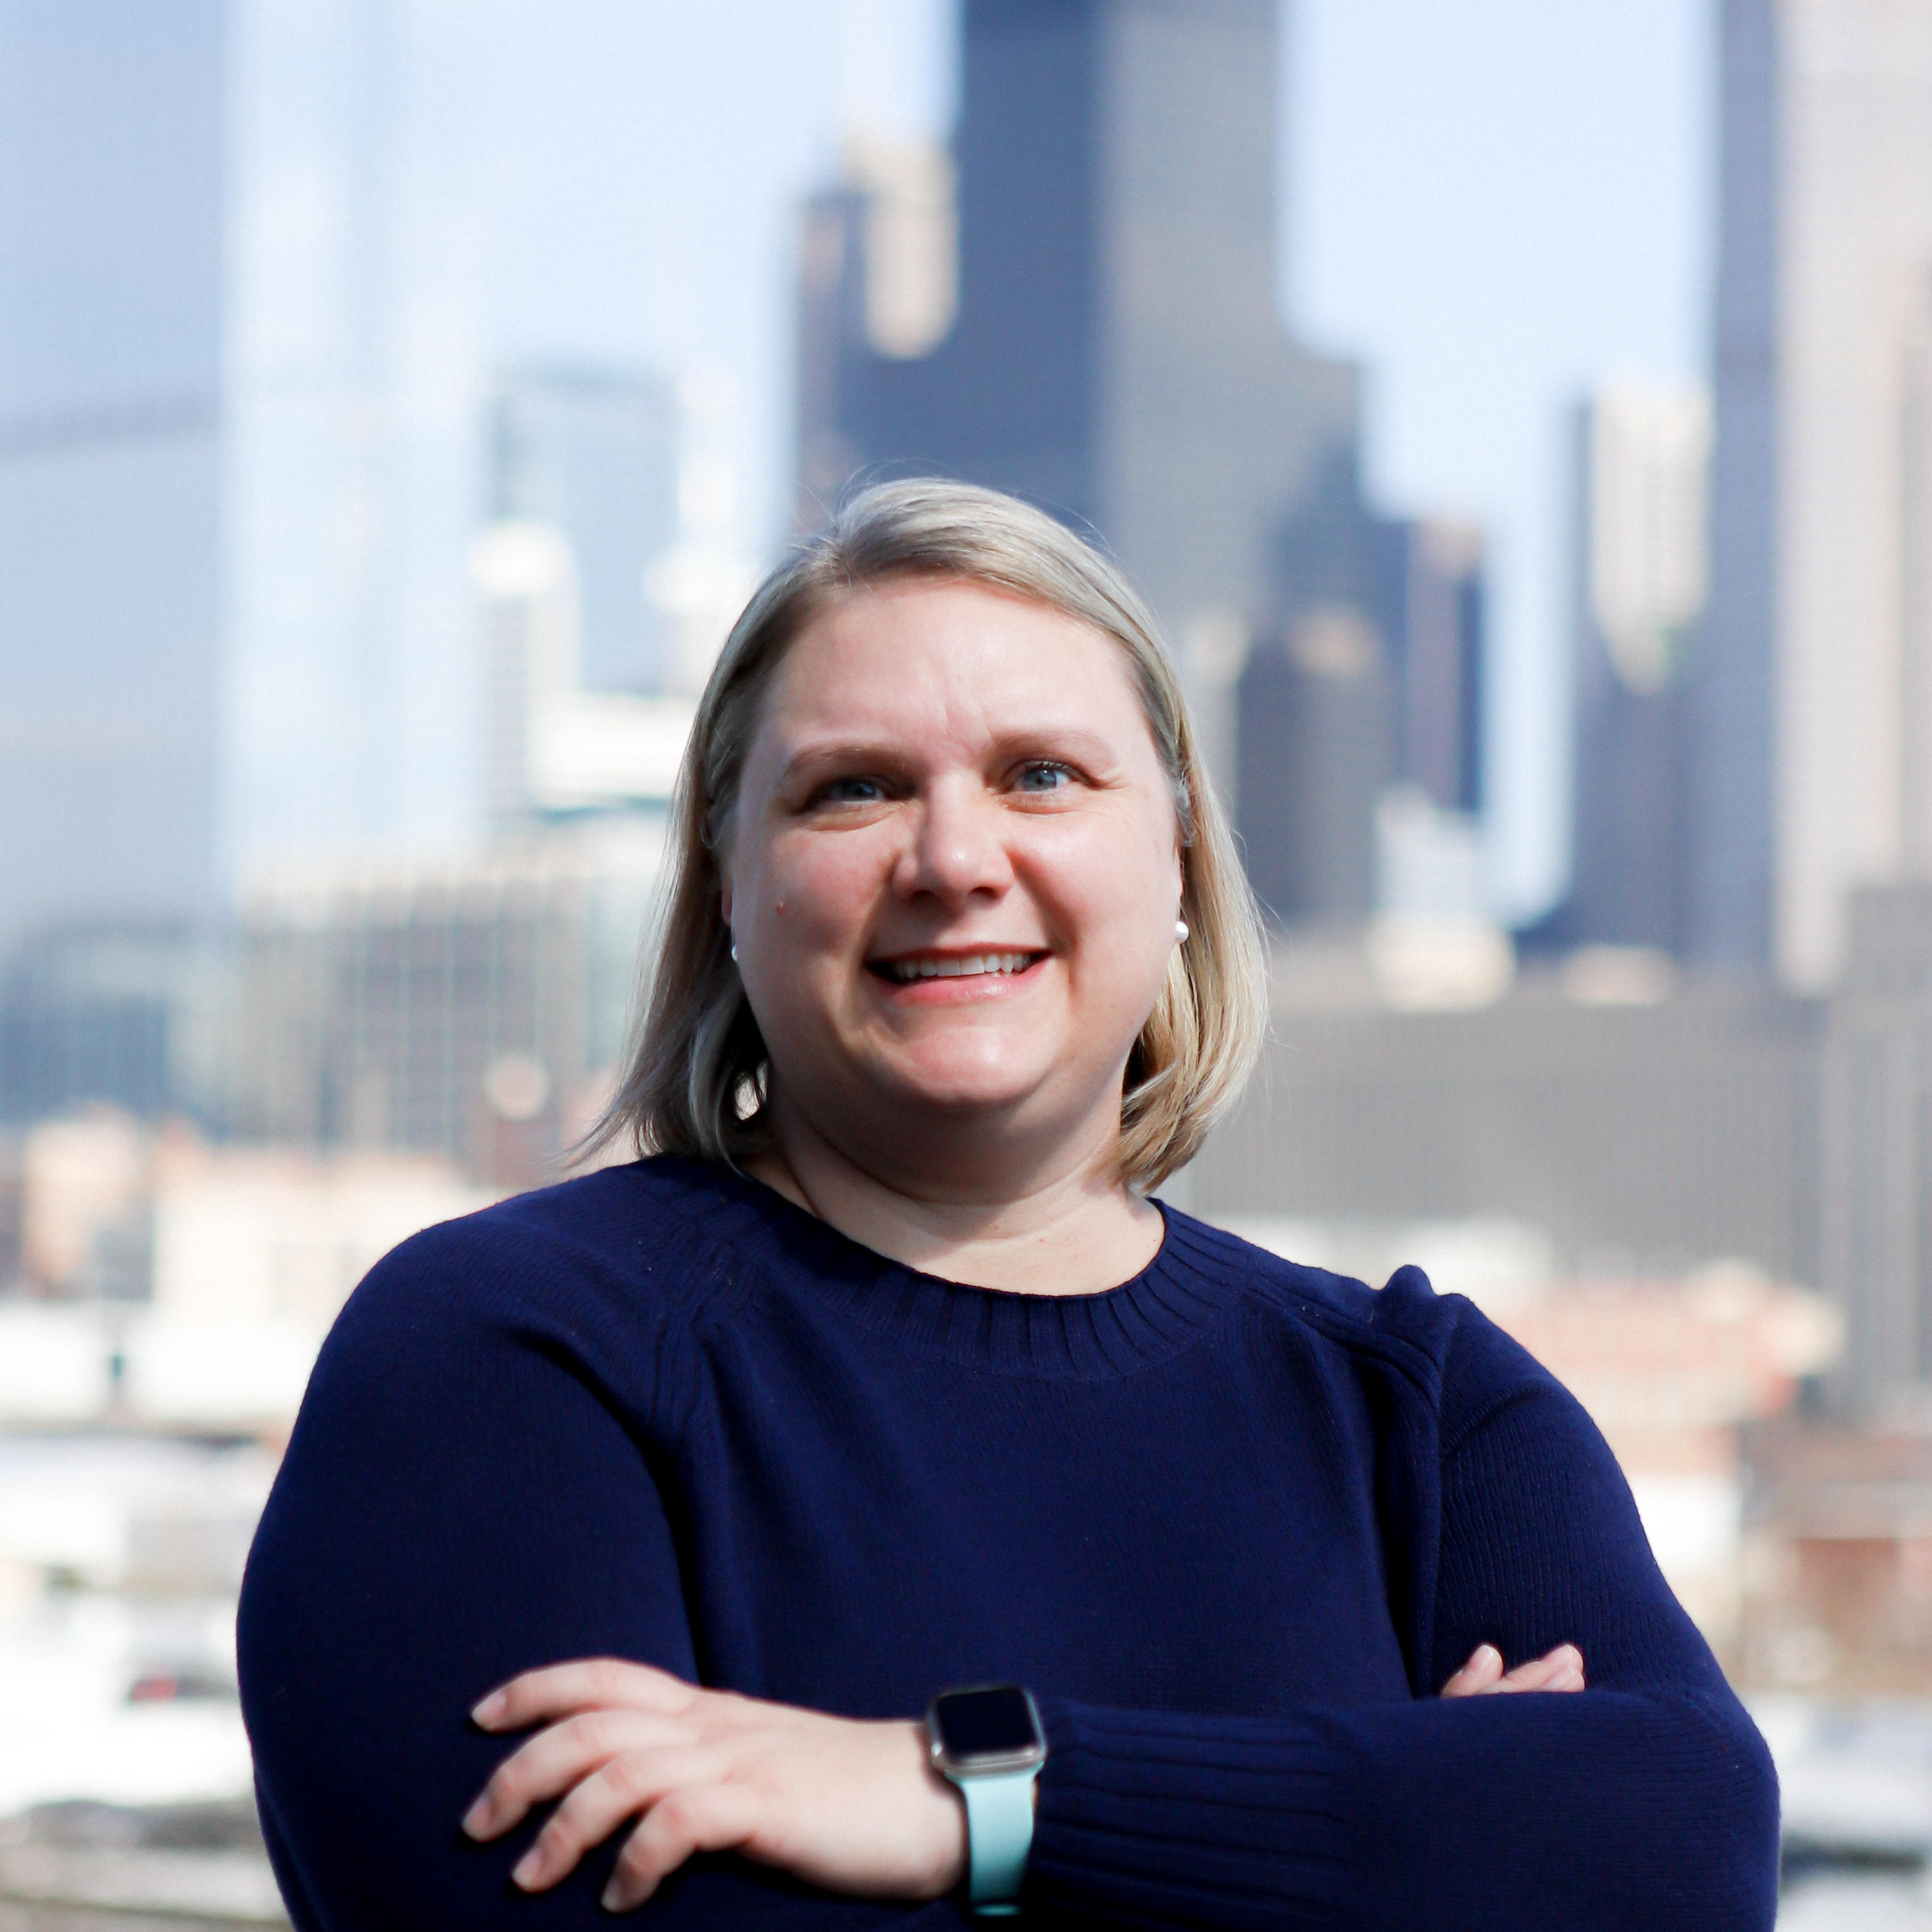 Image of Dr. Cologna with the Chicago skyline in the background